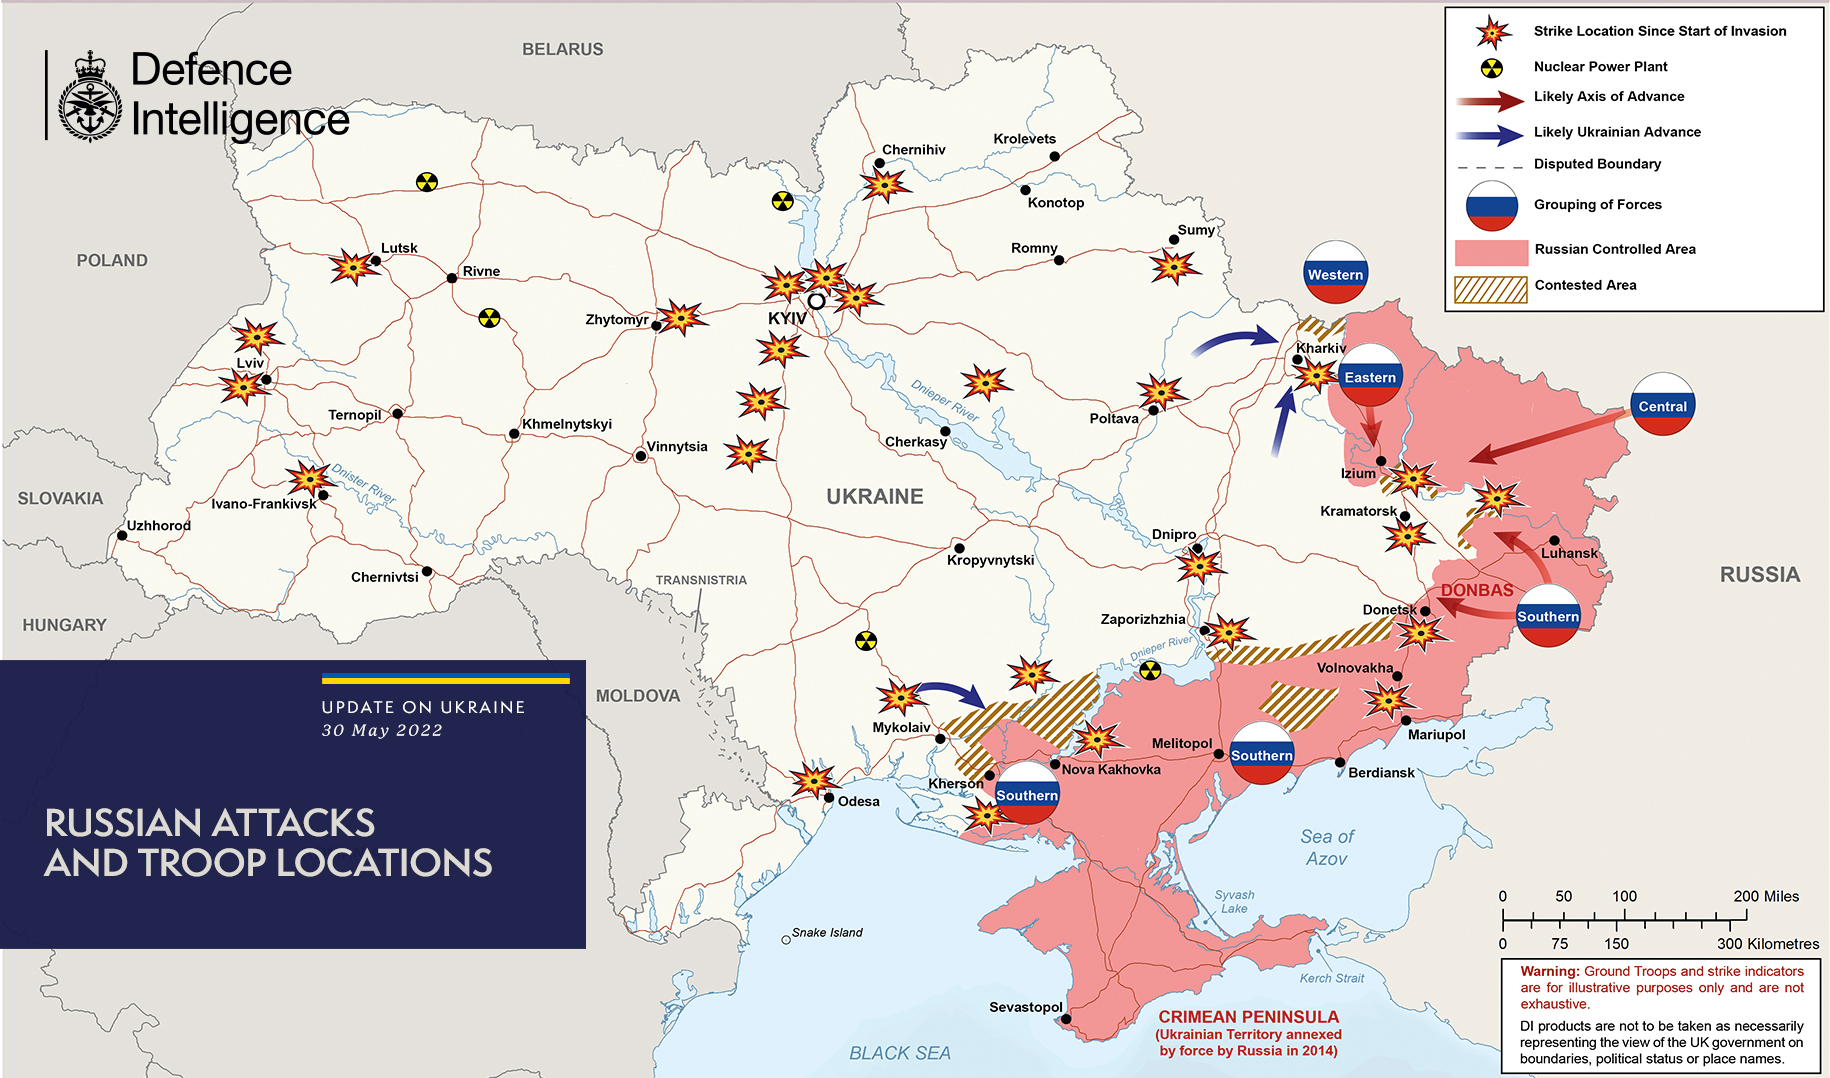 Russian attacks and troop locations map 30/05/22